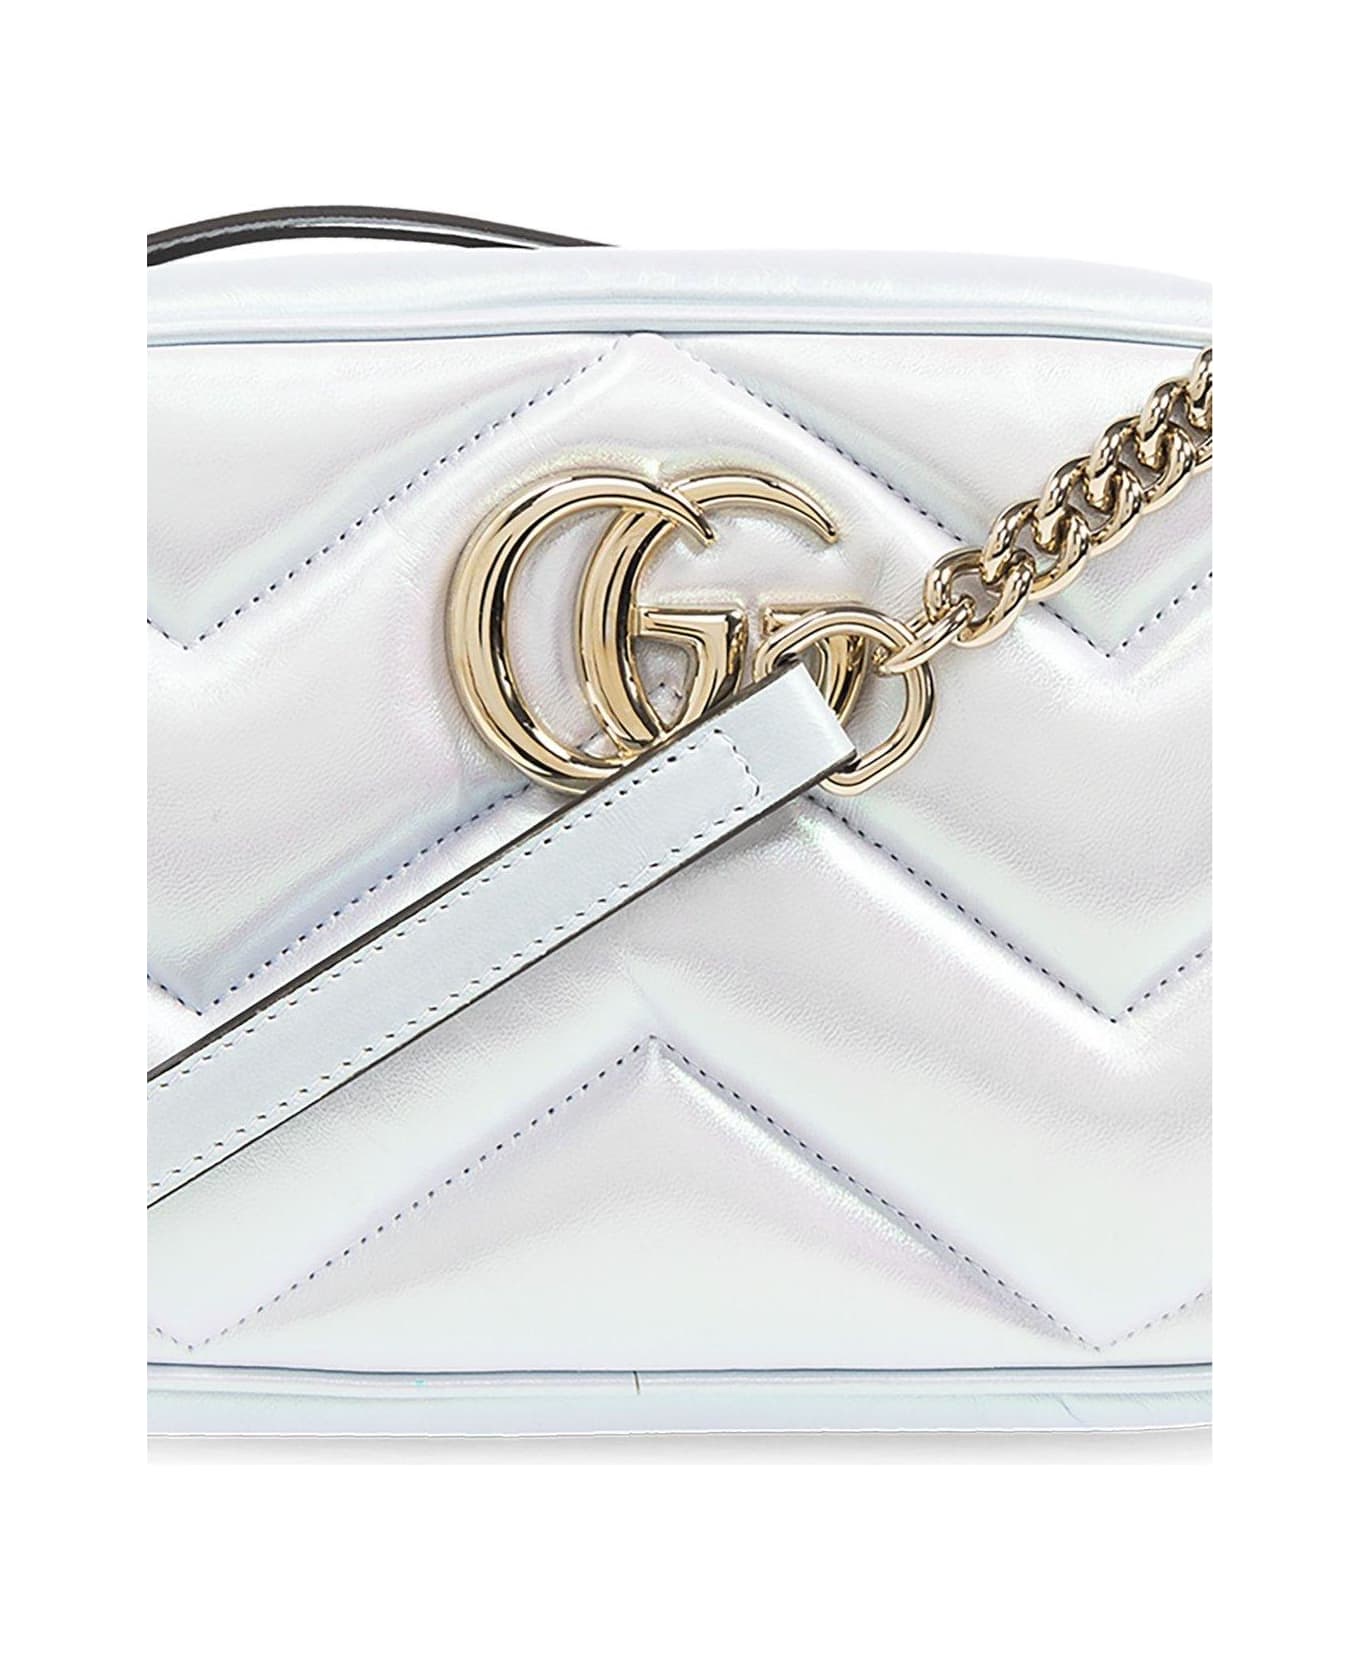 Gucci Gg Marmont Small Shoulder Bag - Iride Snow